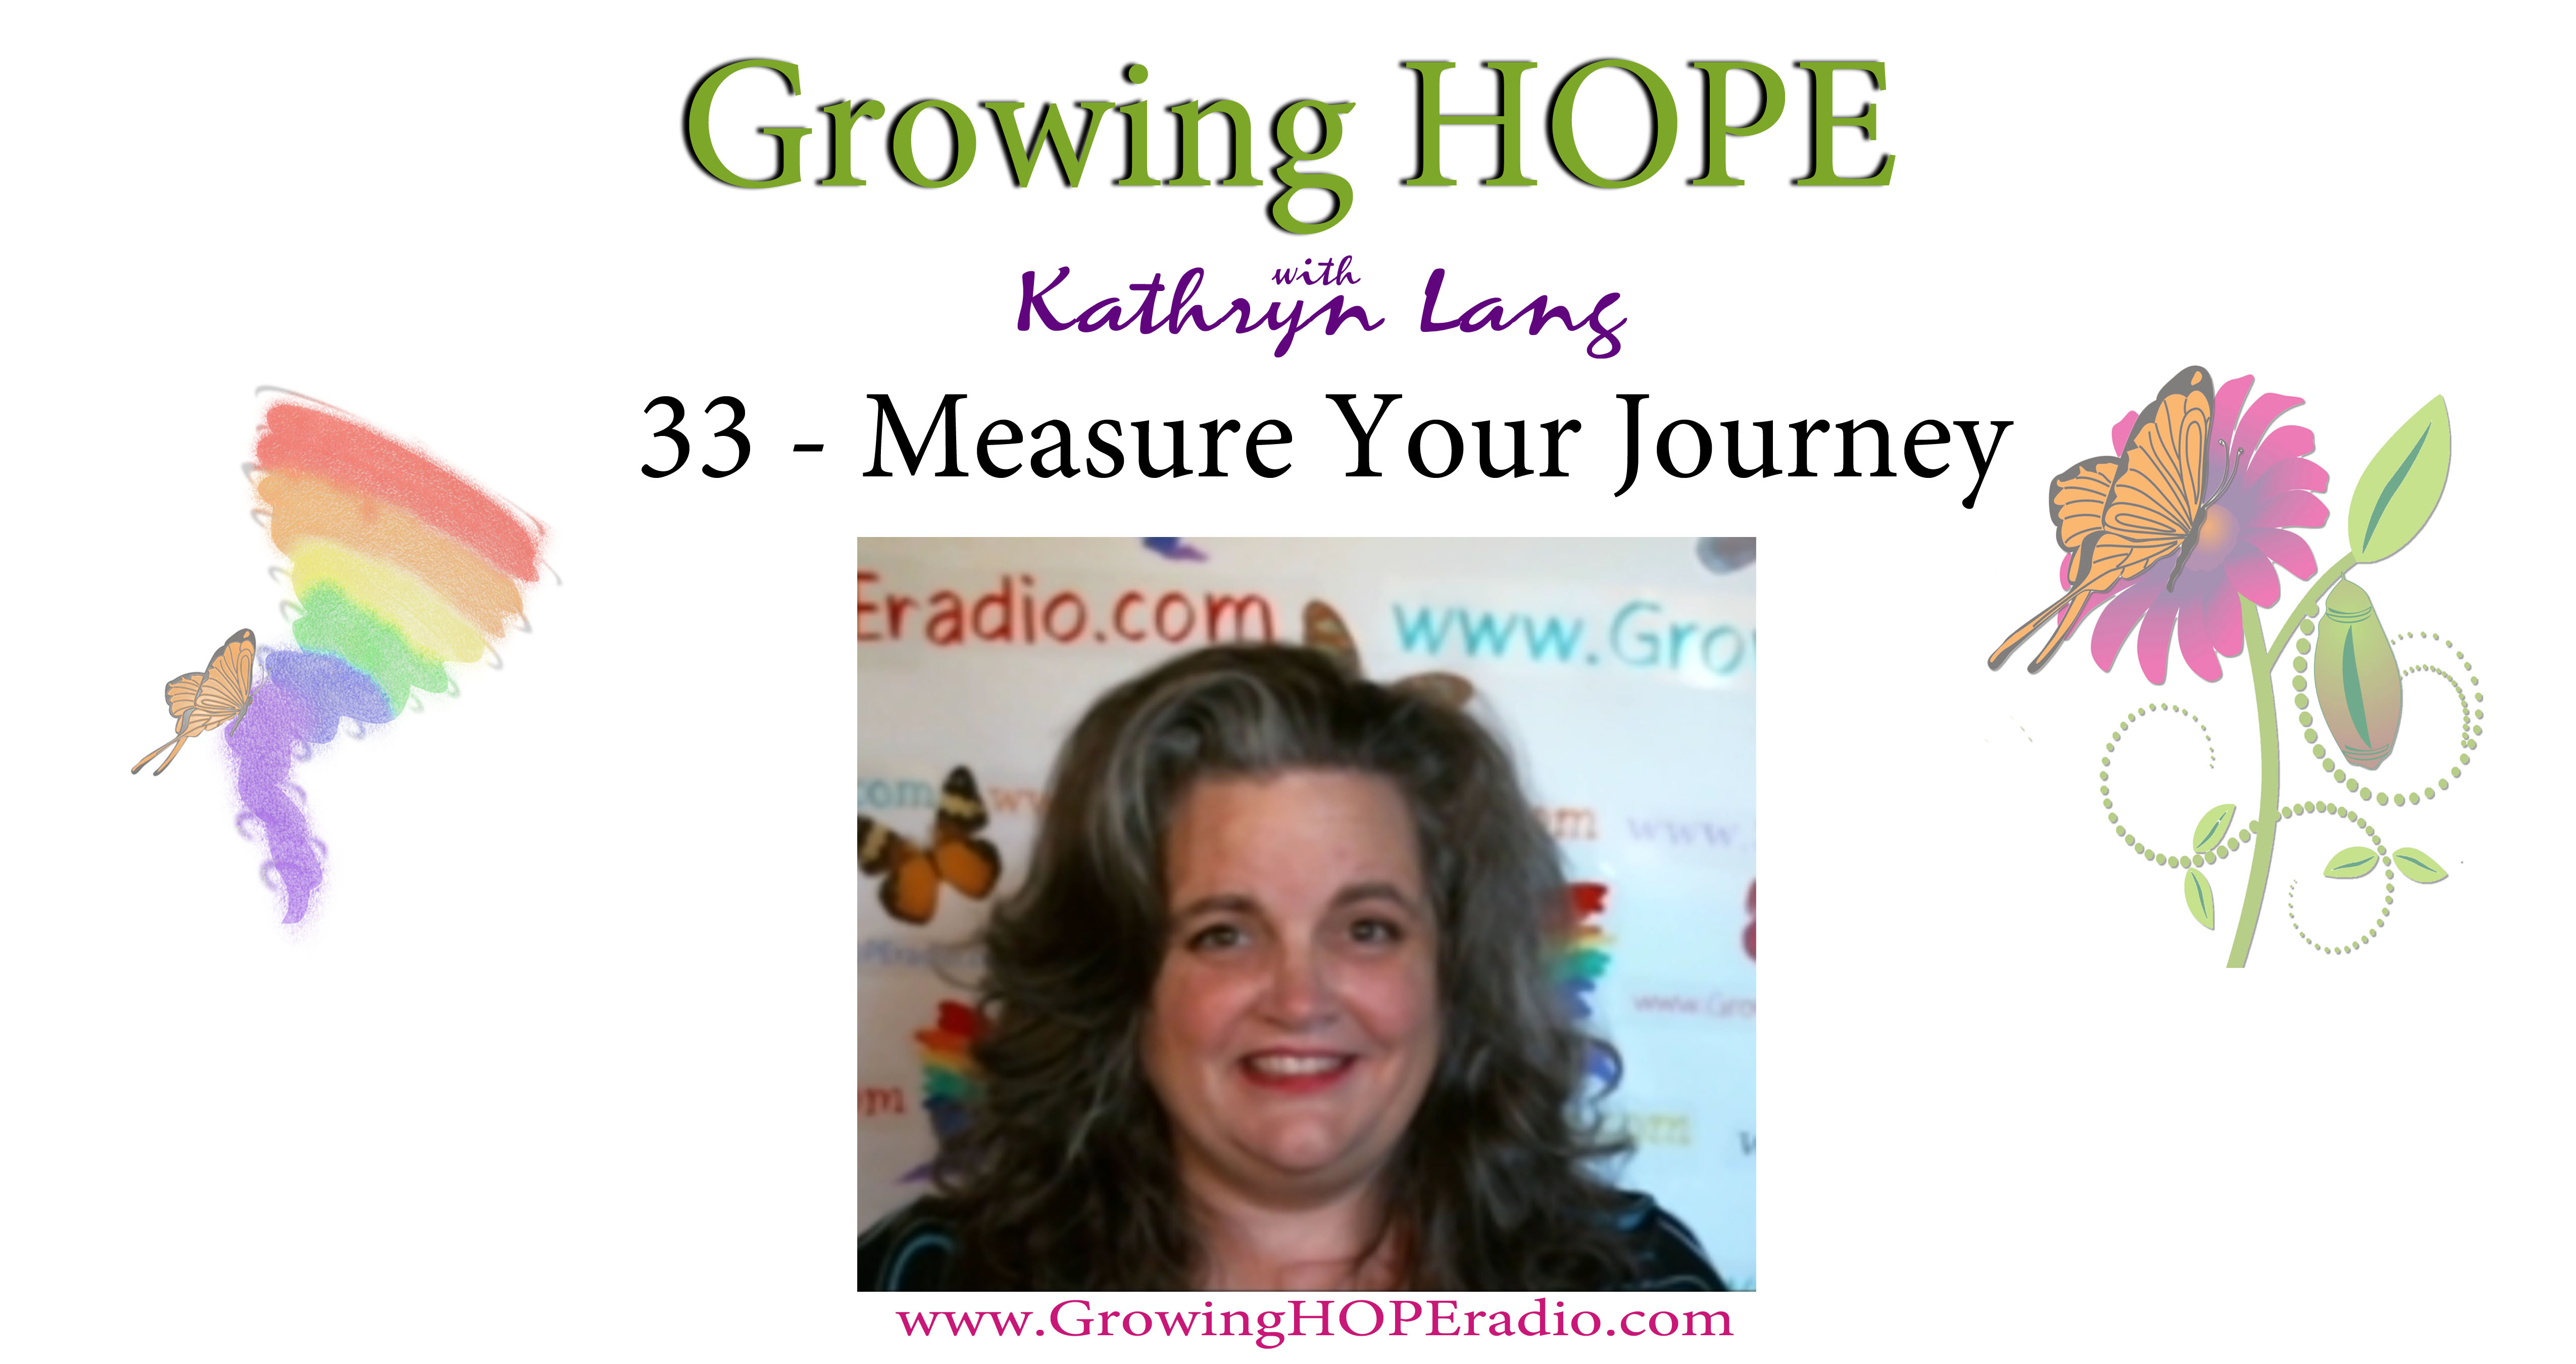 Growing HOPE Daily - 33 - Measure Your Journey